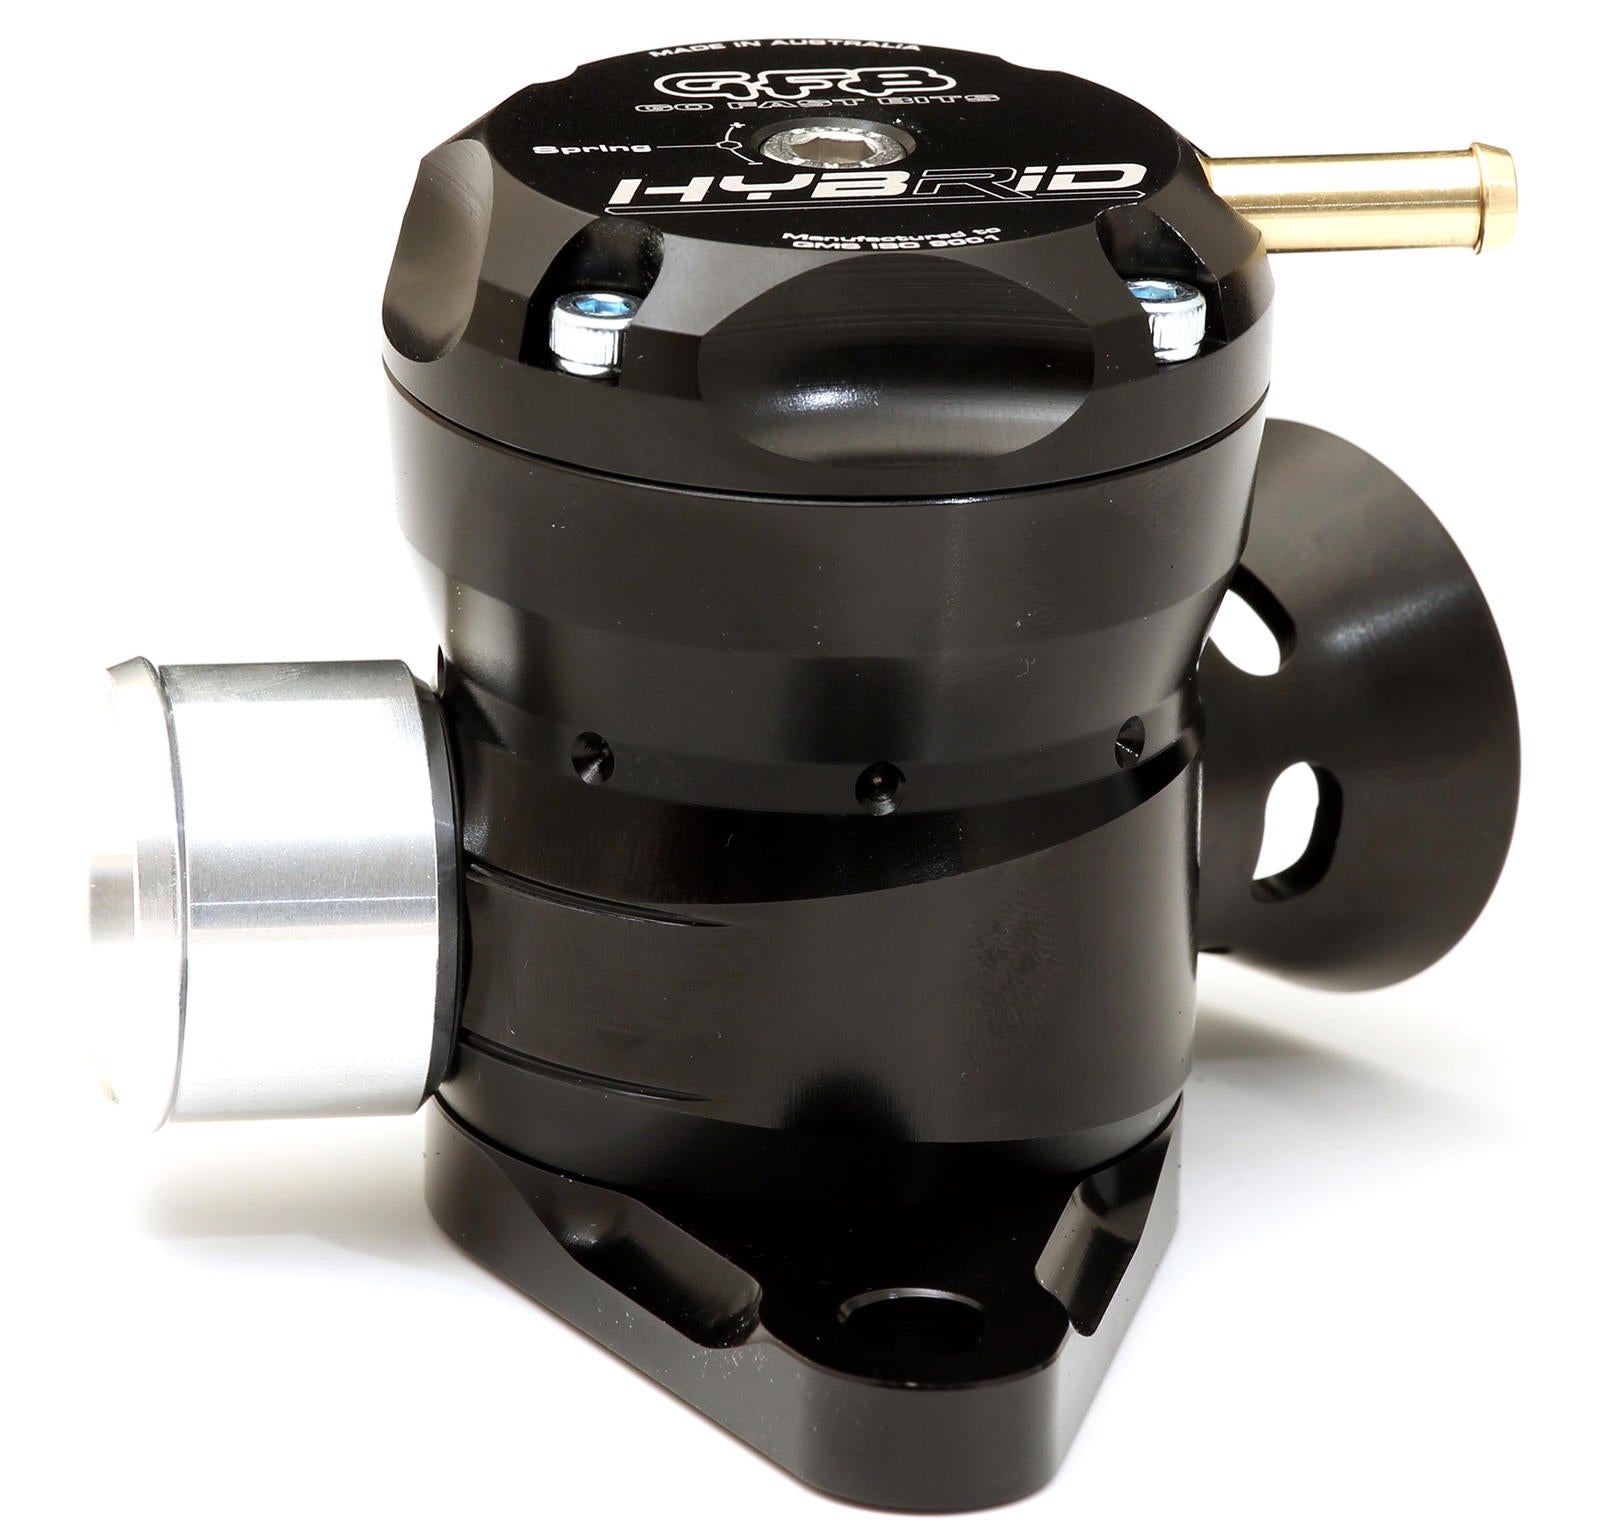 GFB Hybrid Dual Outlet Valve - Skyline GTS-T R32-34, Mazda 3 & 6 MPS, Cx7 - GFB T9208